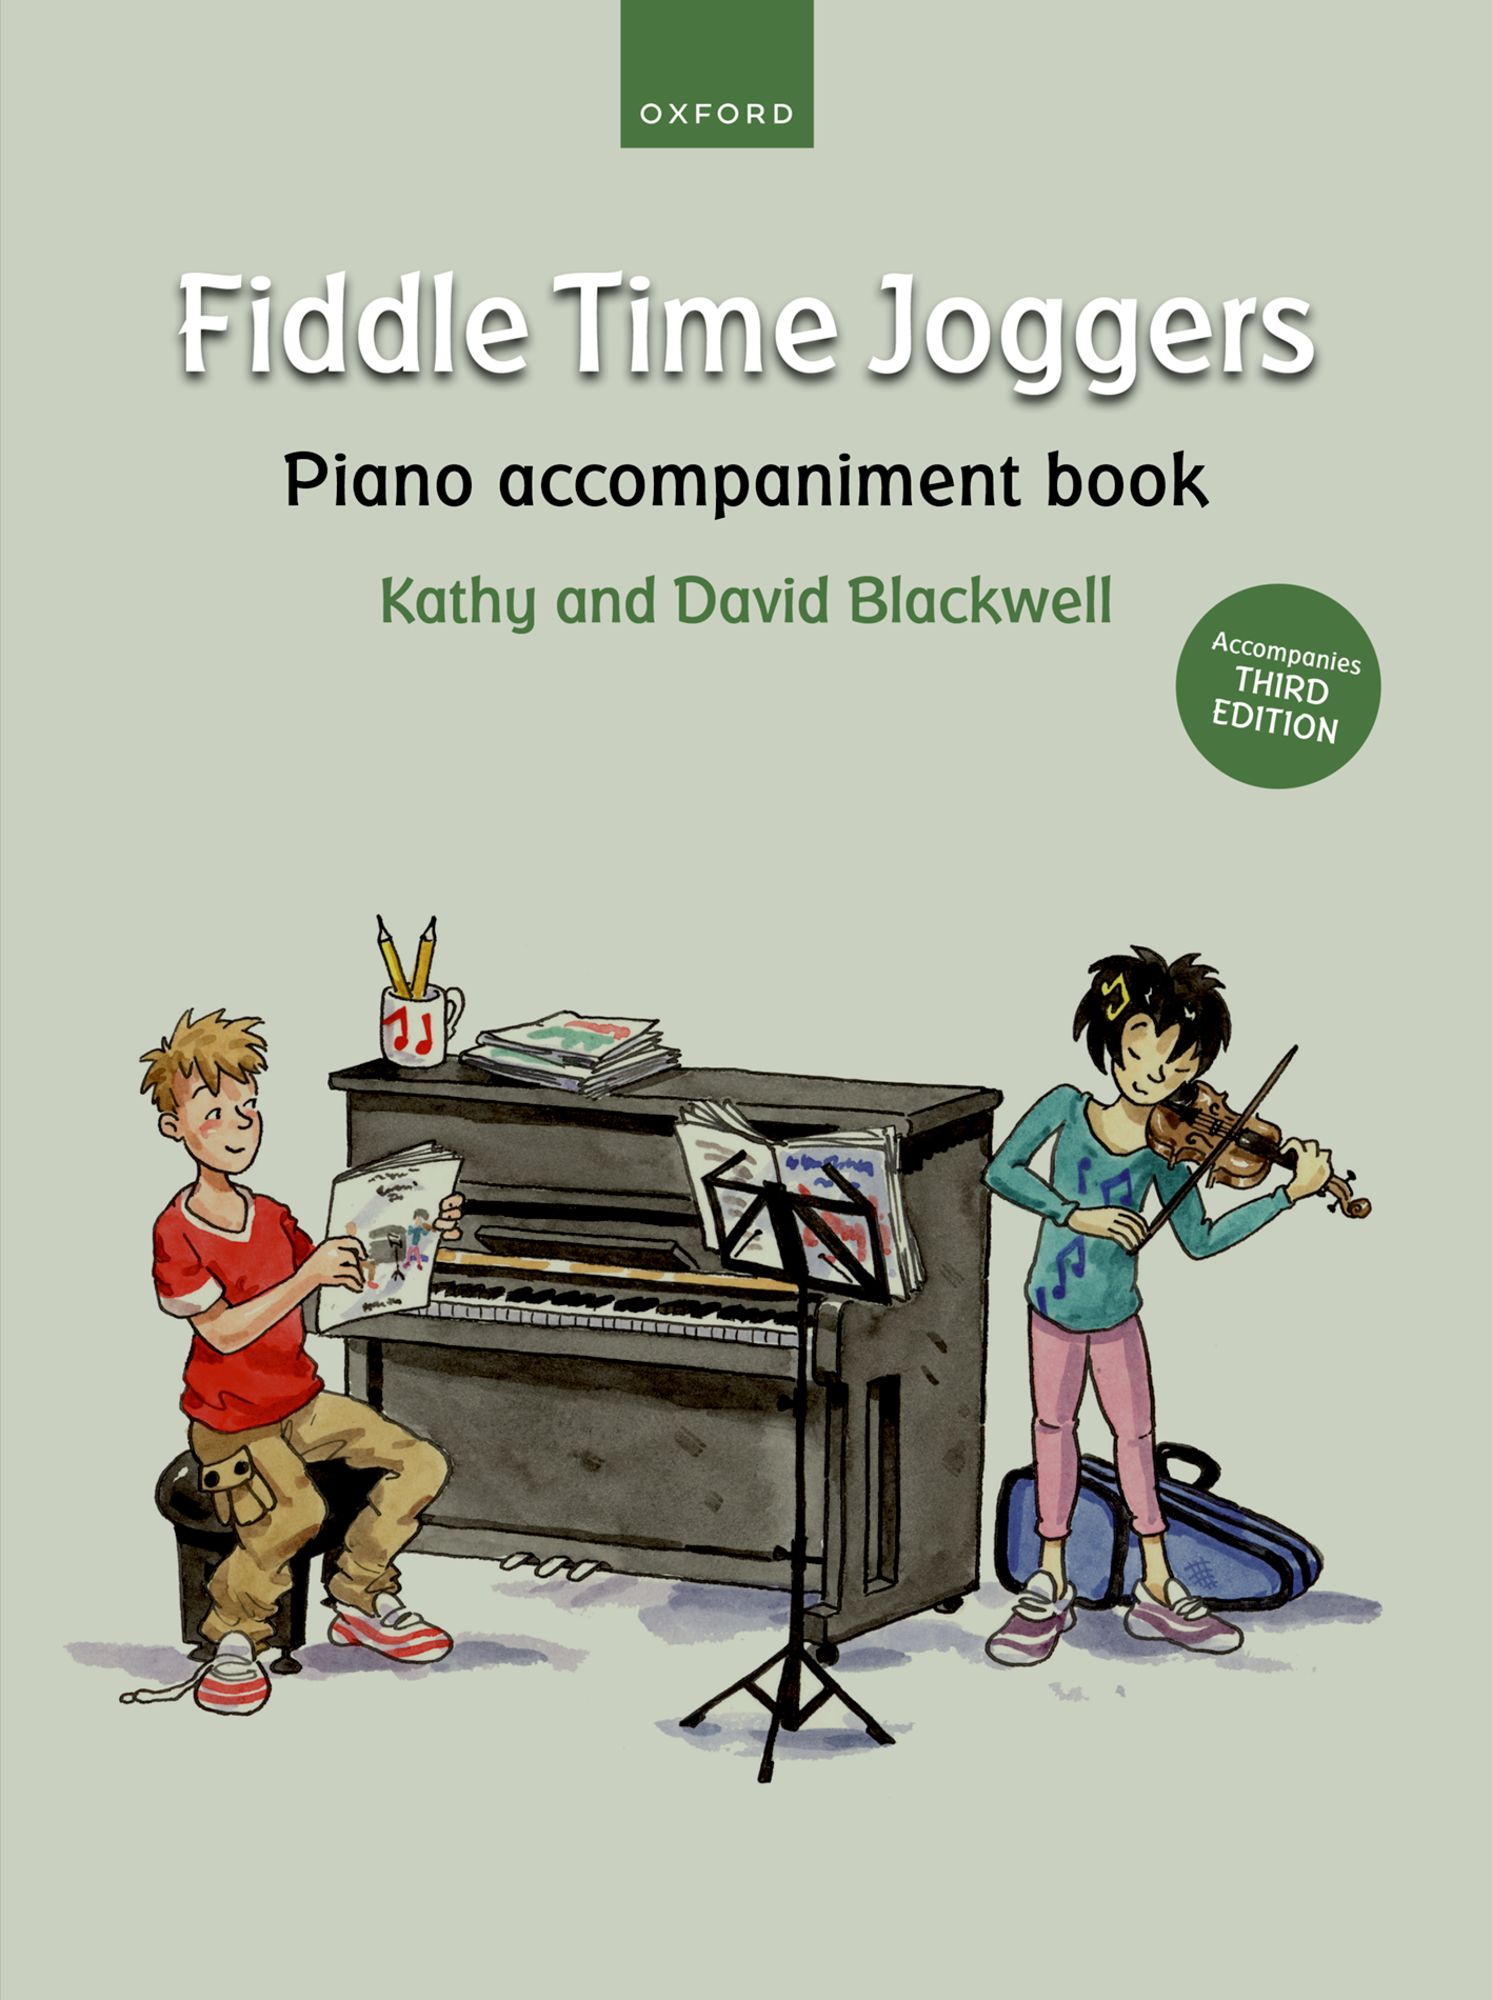 Fiddle Time Joggers Piano Accomp For 3rd Edition Sheet Music Songbook